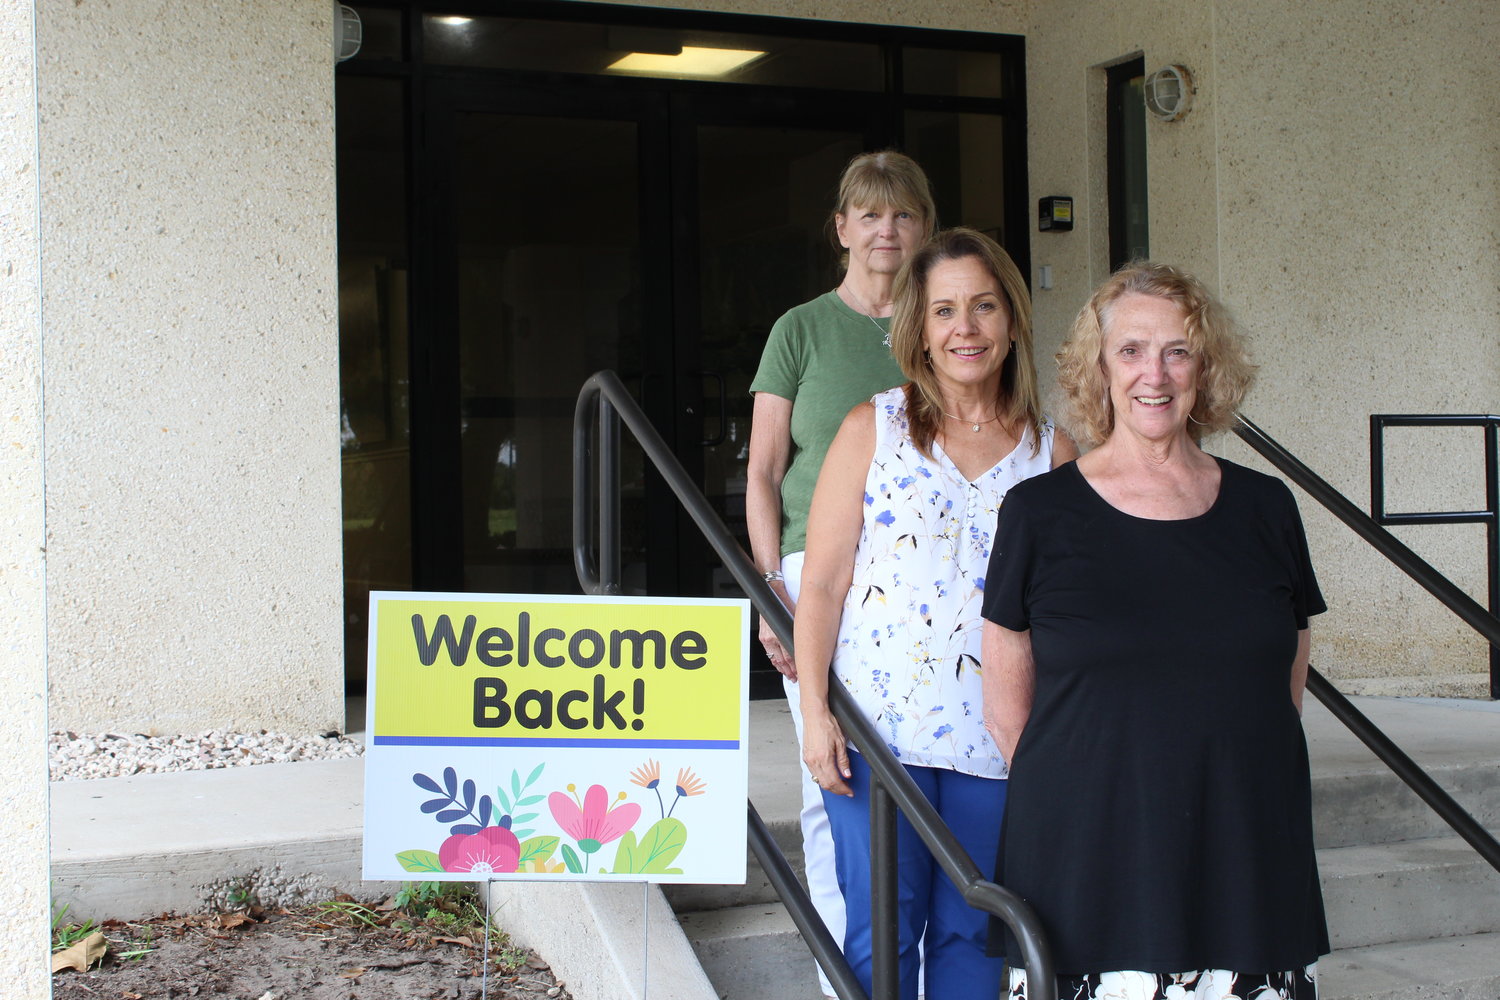 Council on Aging IMEP facilitator Michele Stevens, lead facilitator Susan Miller, and interim IMEP manager Myra Fisher prepare for the August 17 reopening of the COA’s Ponte Vedra Memory Care Center in Ponte Vedra Beach.